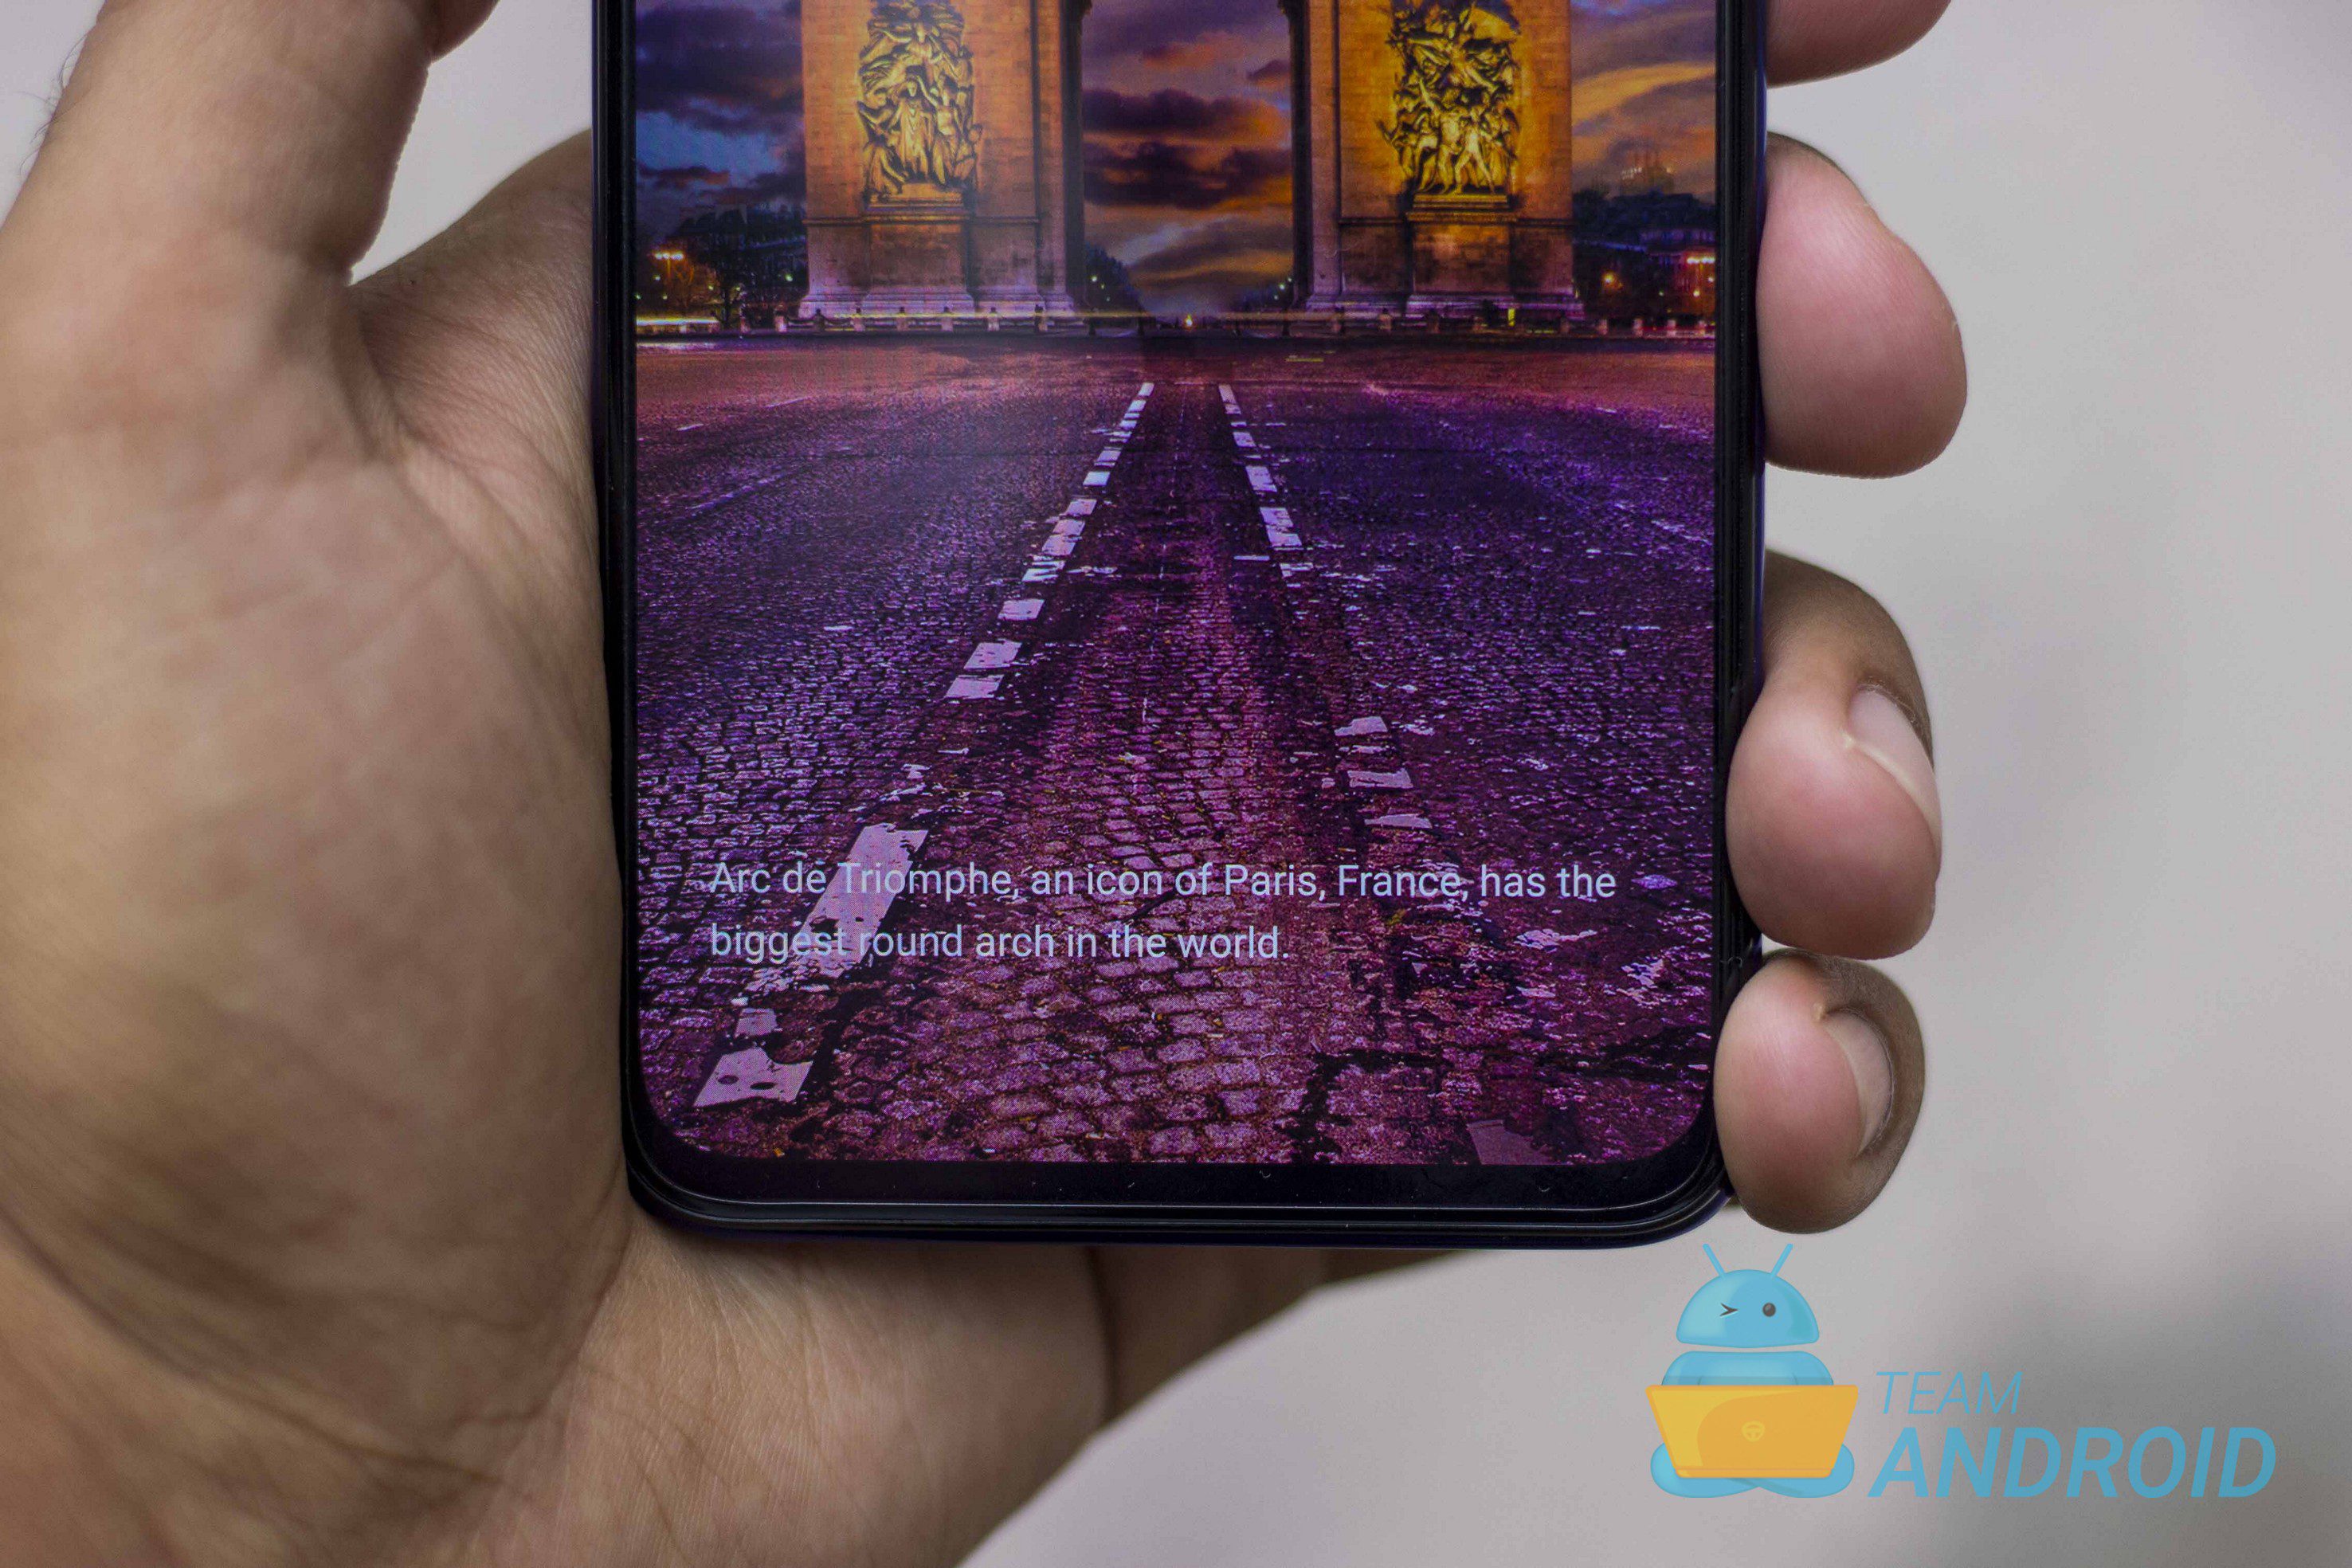 Oppo Reno 3 Pro Review: Is This a Midrange Flagship Phone? 27